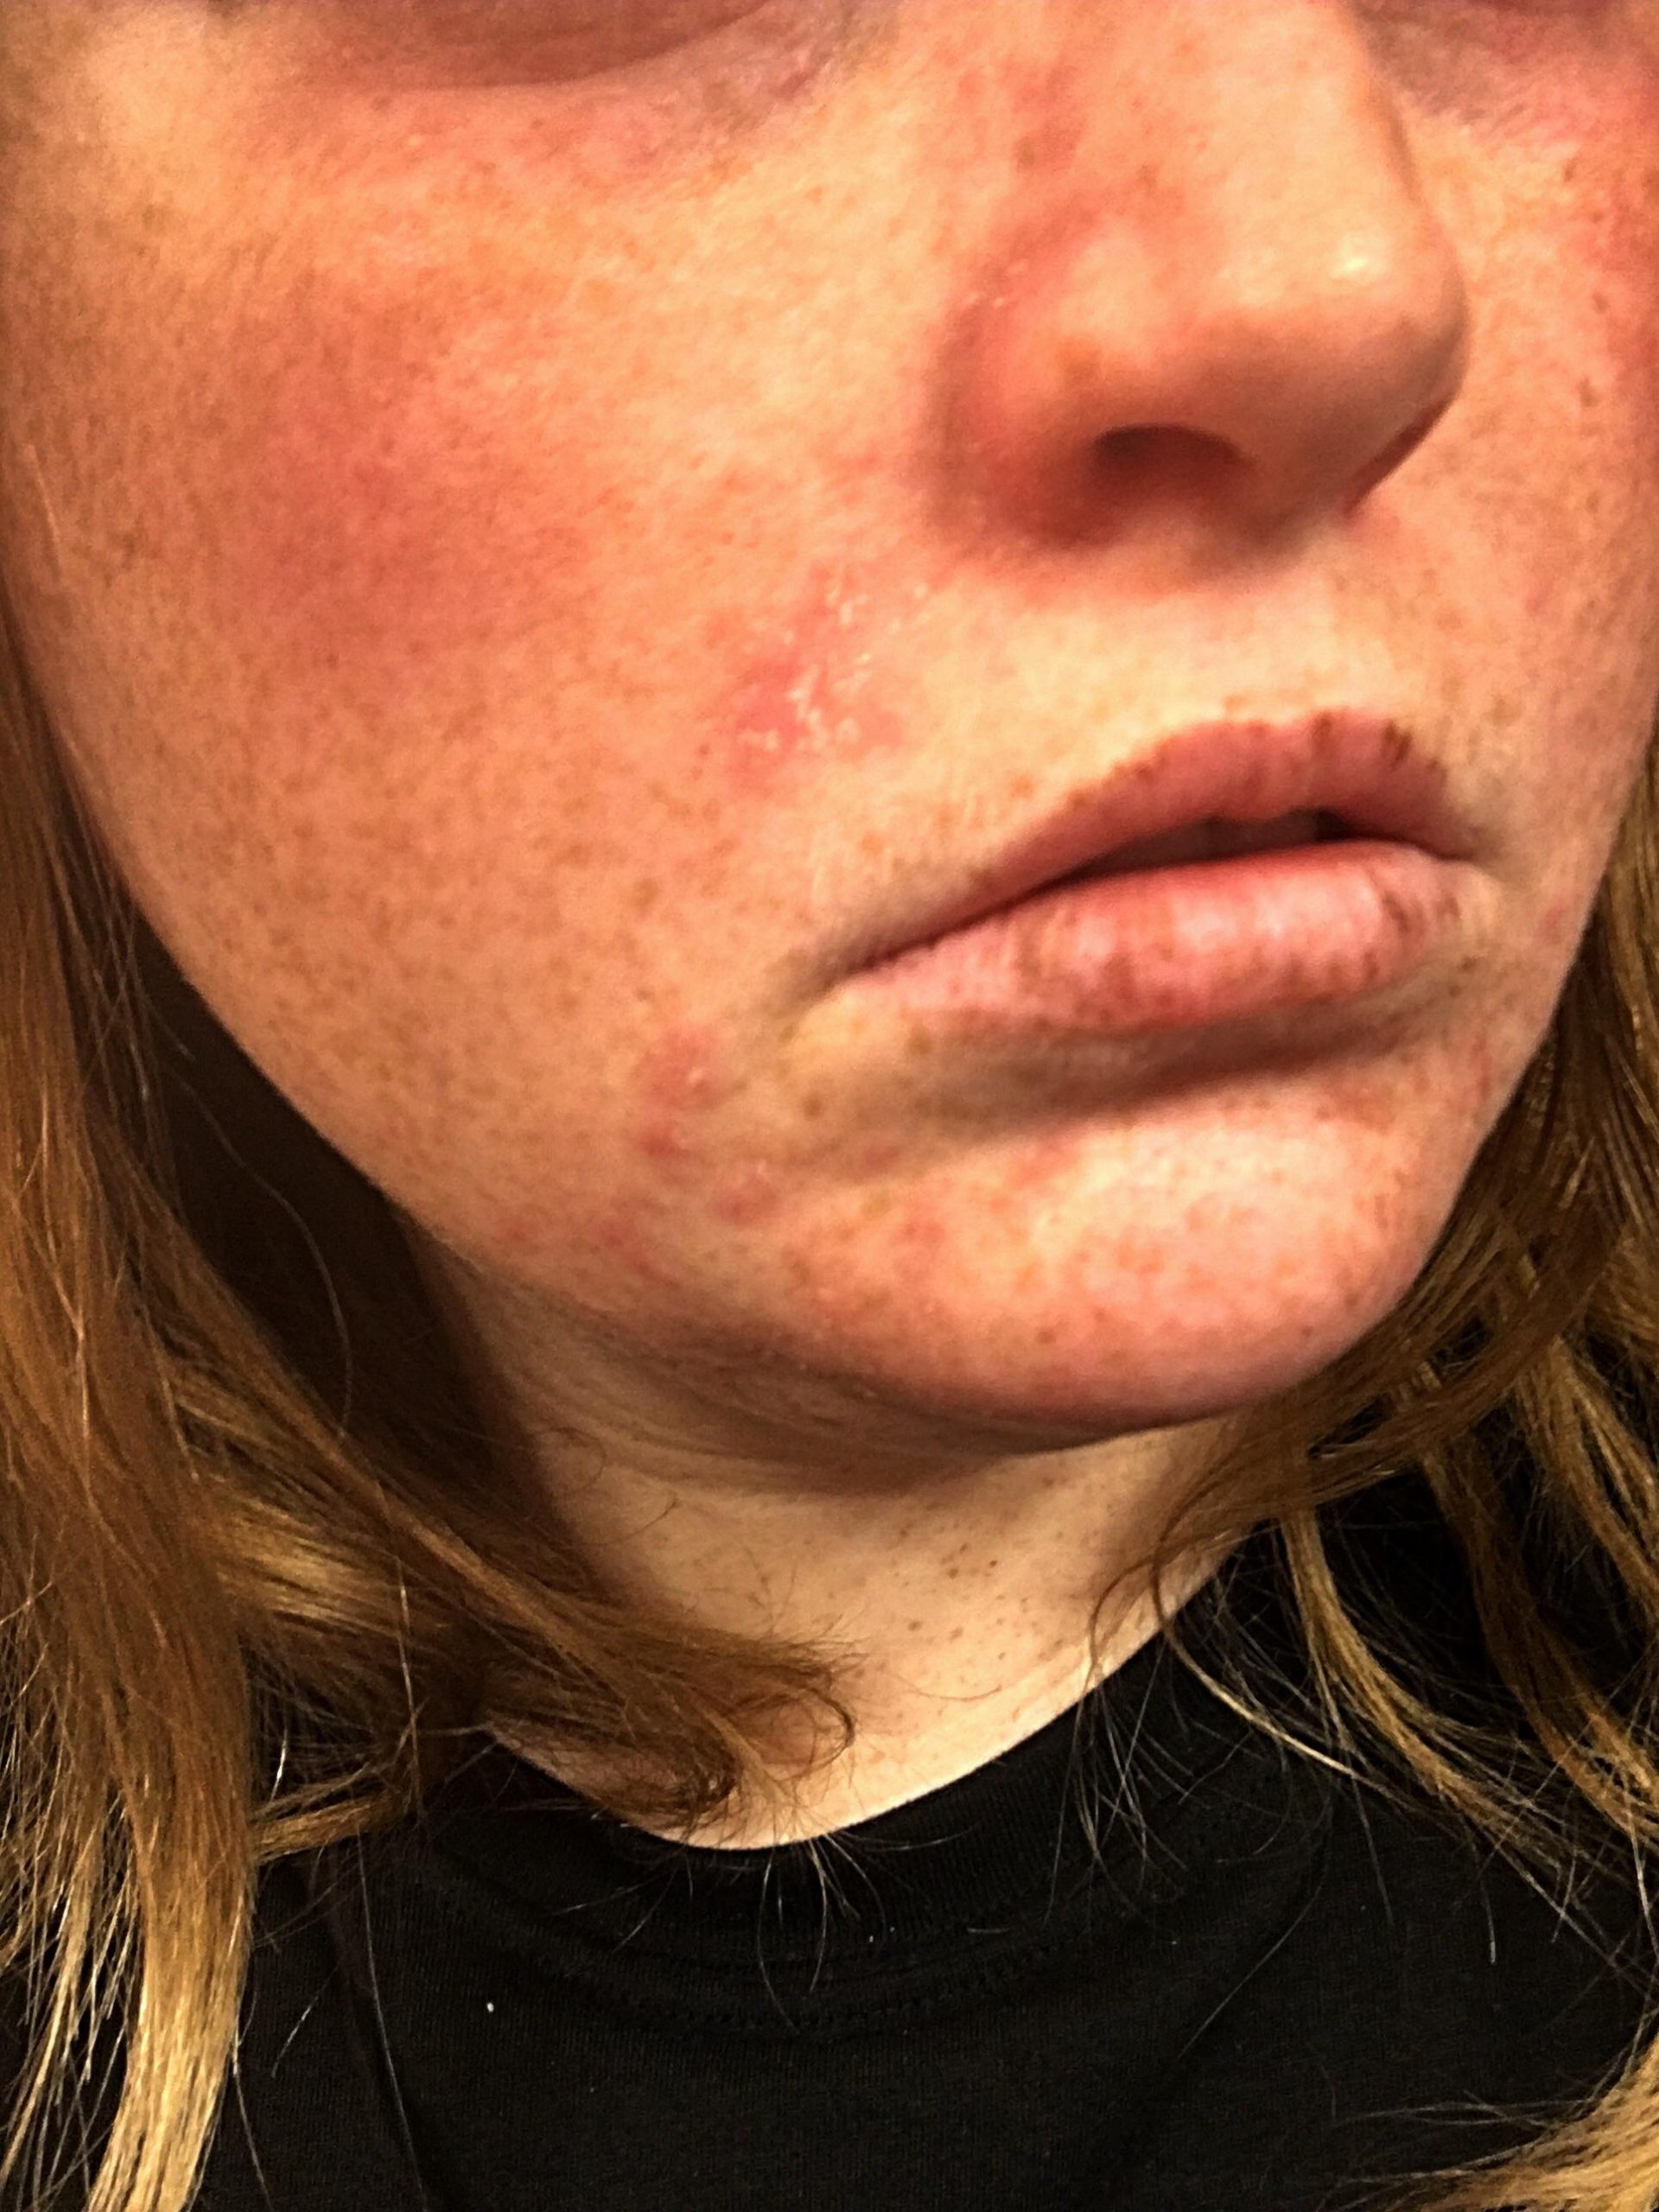 [Skin Concerns] Eczema on my face, please help! Routine in comments ...